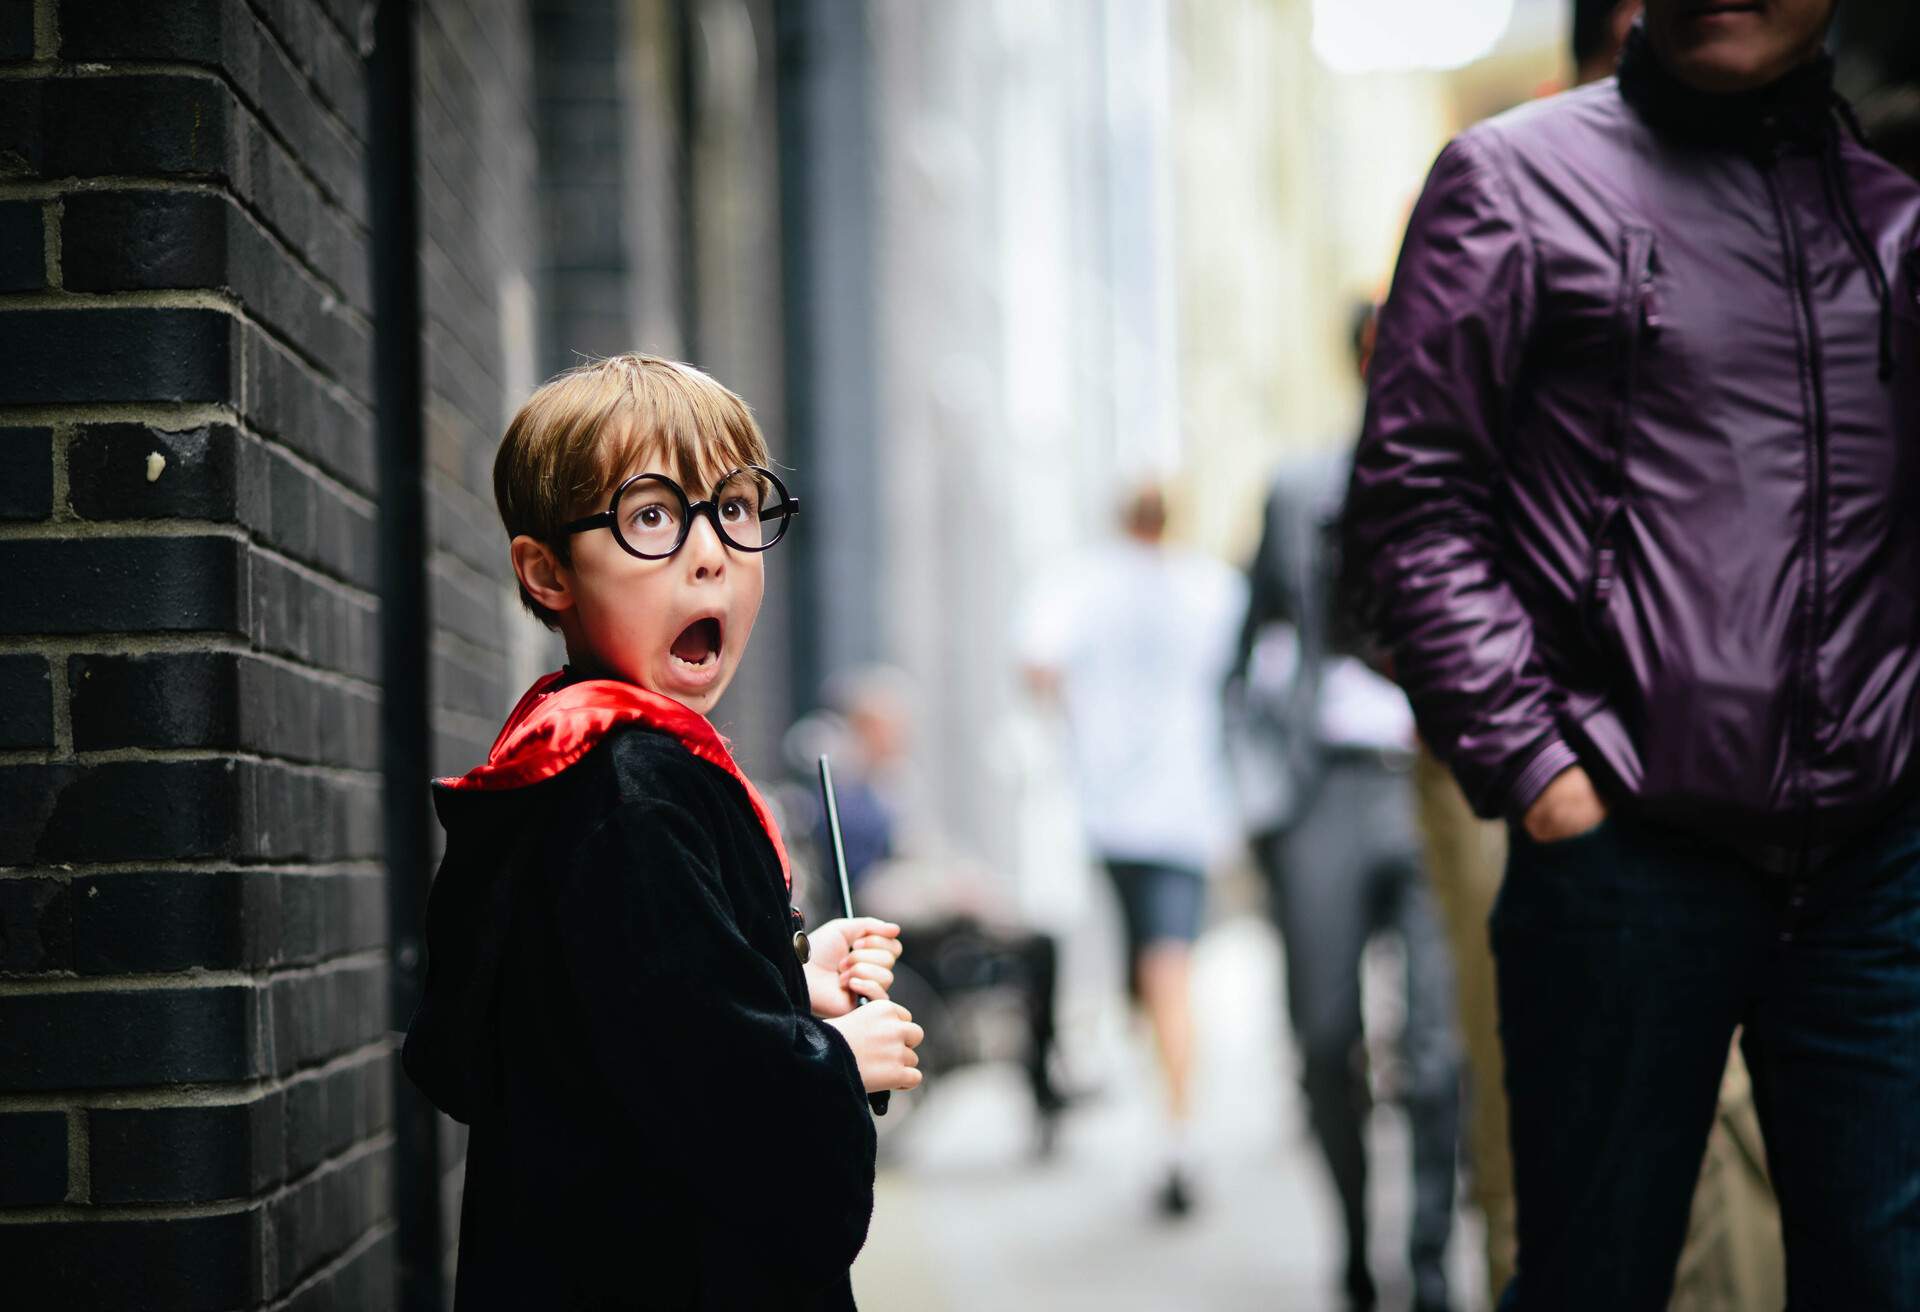 Boy, pretending to be Harry Potter. He is carrying a wand and has his mouth wide open as he pretends to see a Dementor.